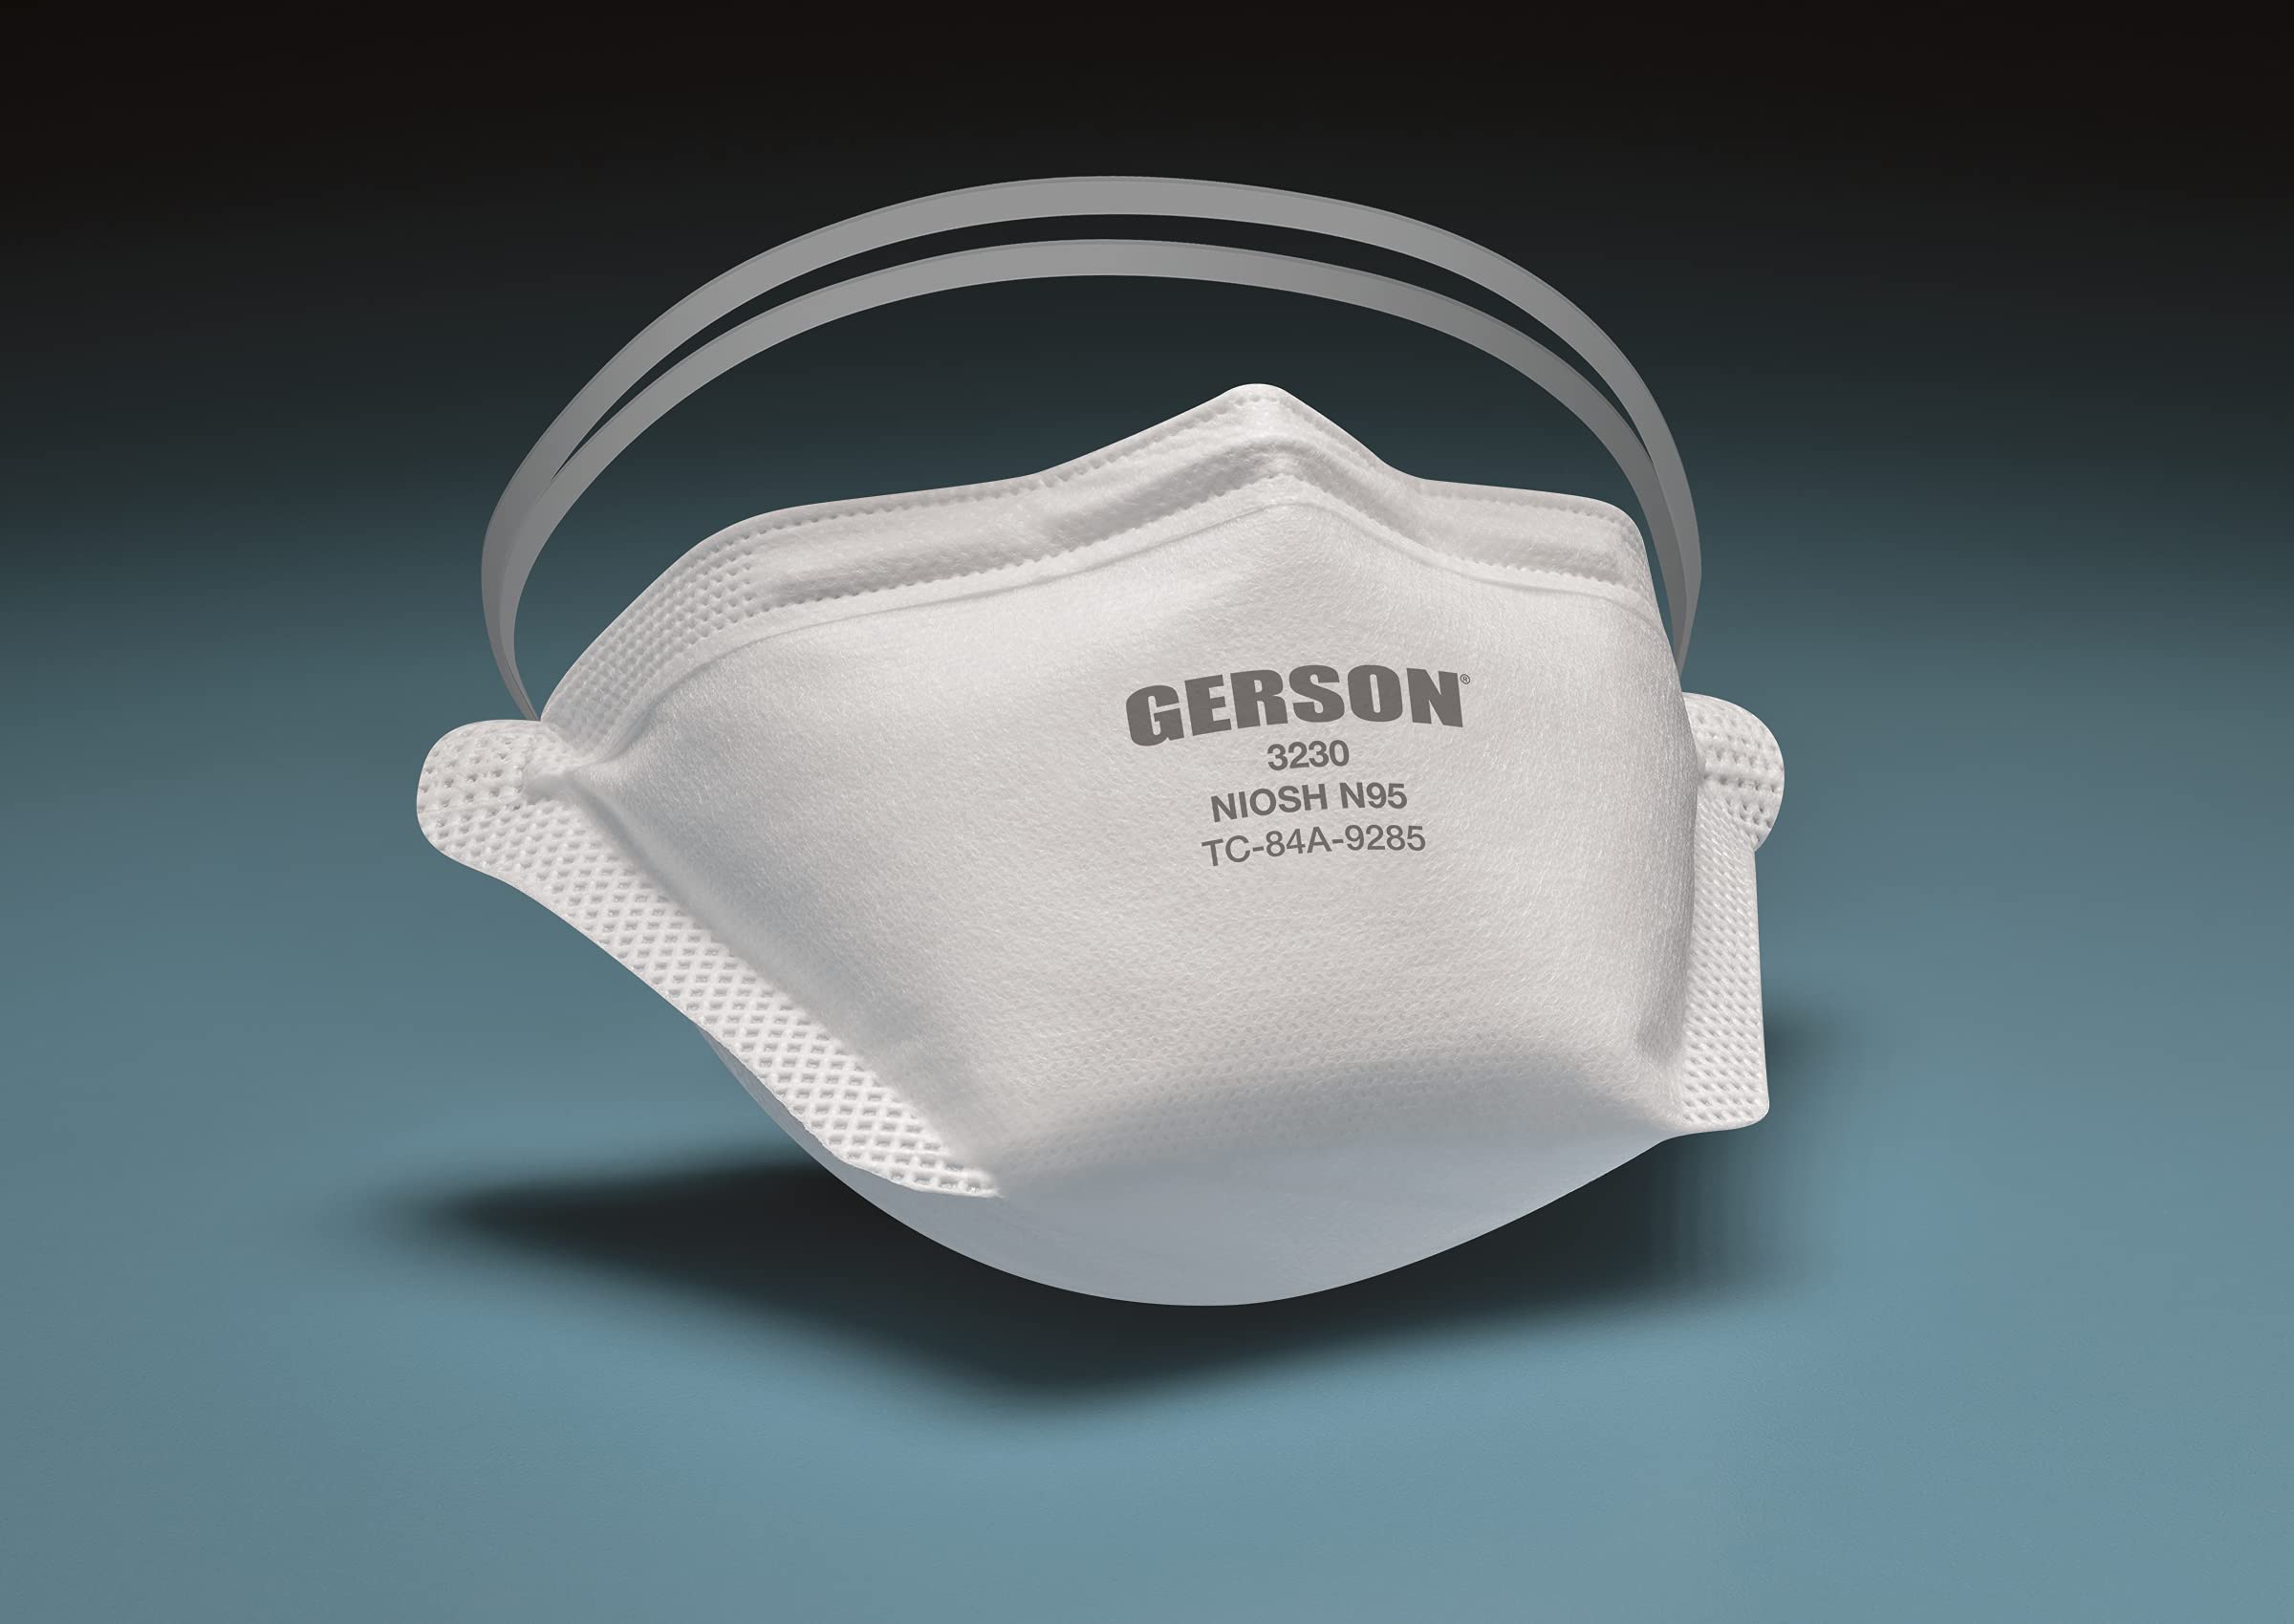 Gerson N95 Pouch Respirator (3230), NIOSH-Approved, Made in U.S.A., One-Size, 5 Respirators/Travel Pack, White